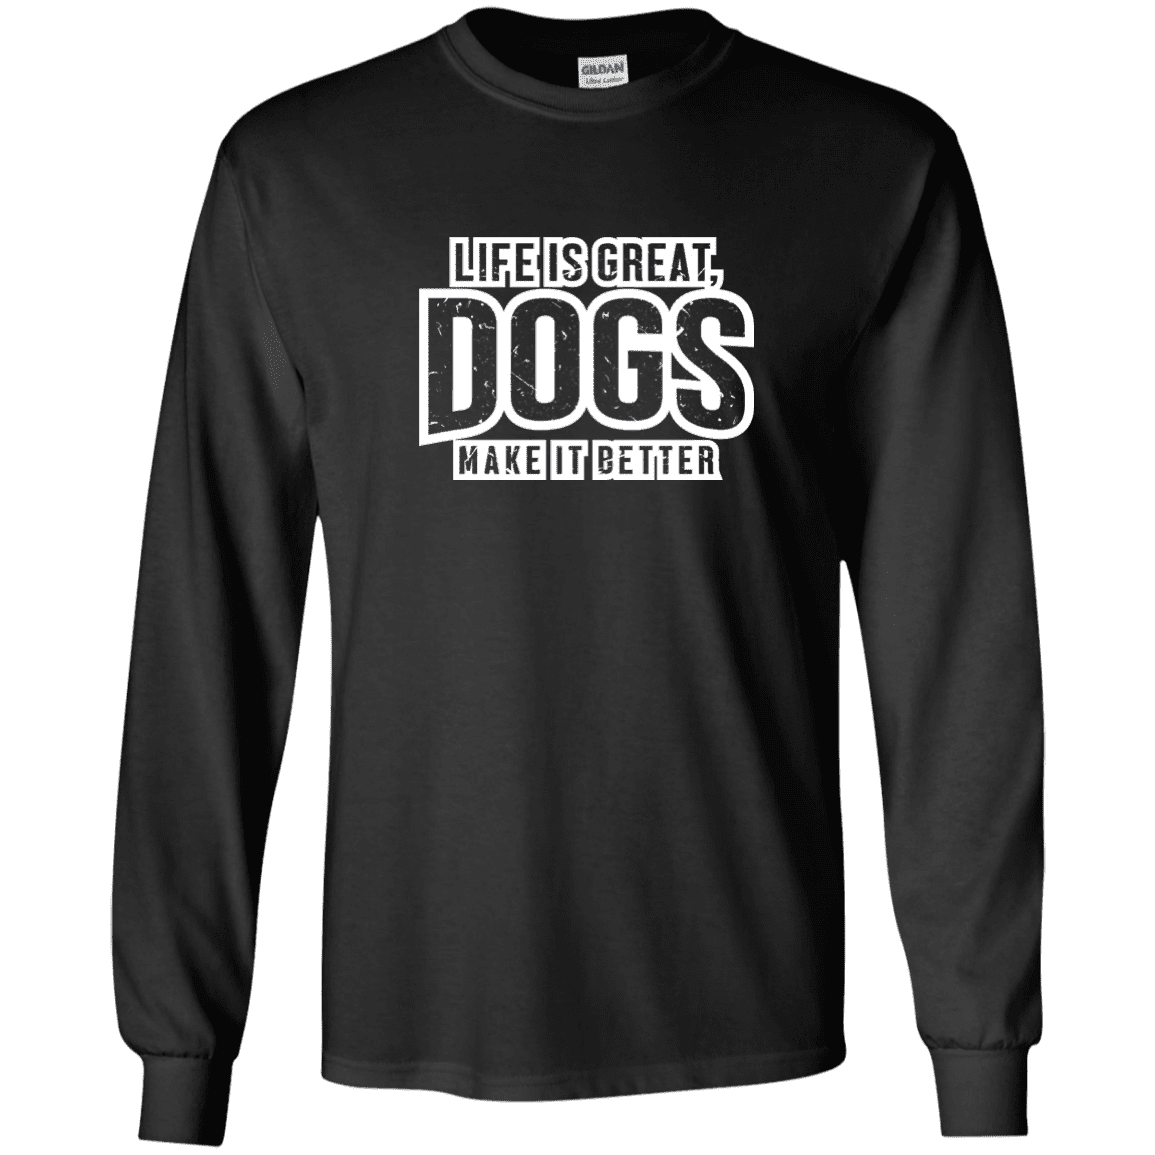 Life Is Great Dogs - Long Sleeve T Shirt – Rescuers Club